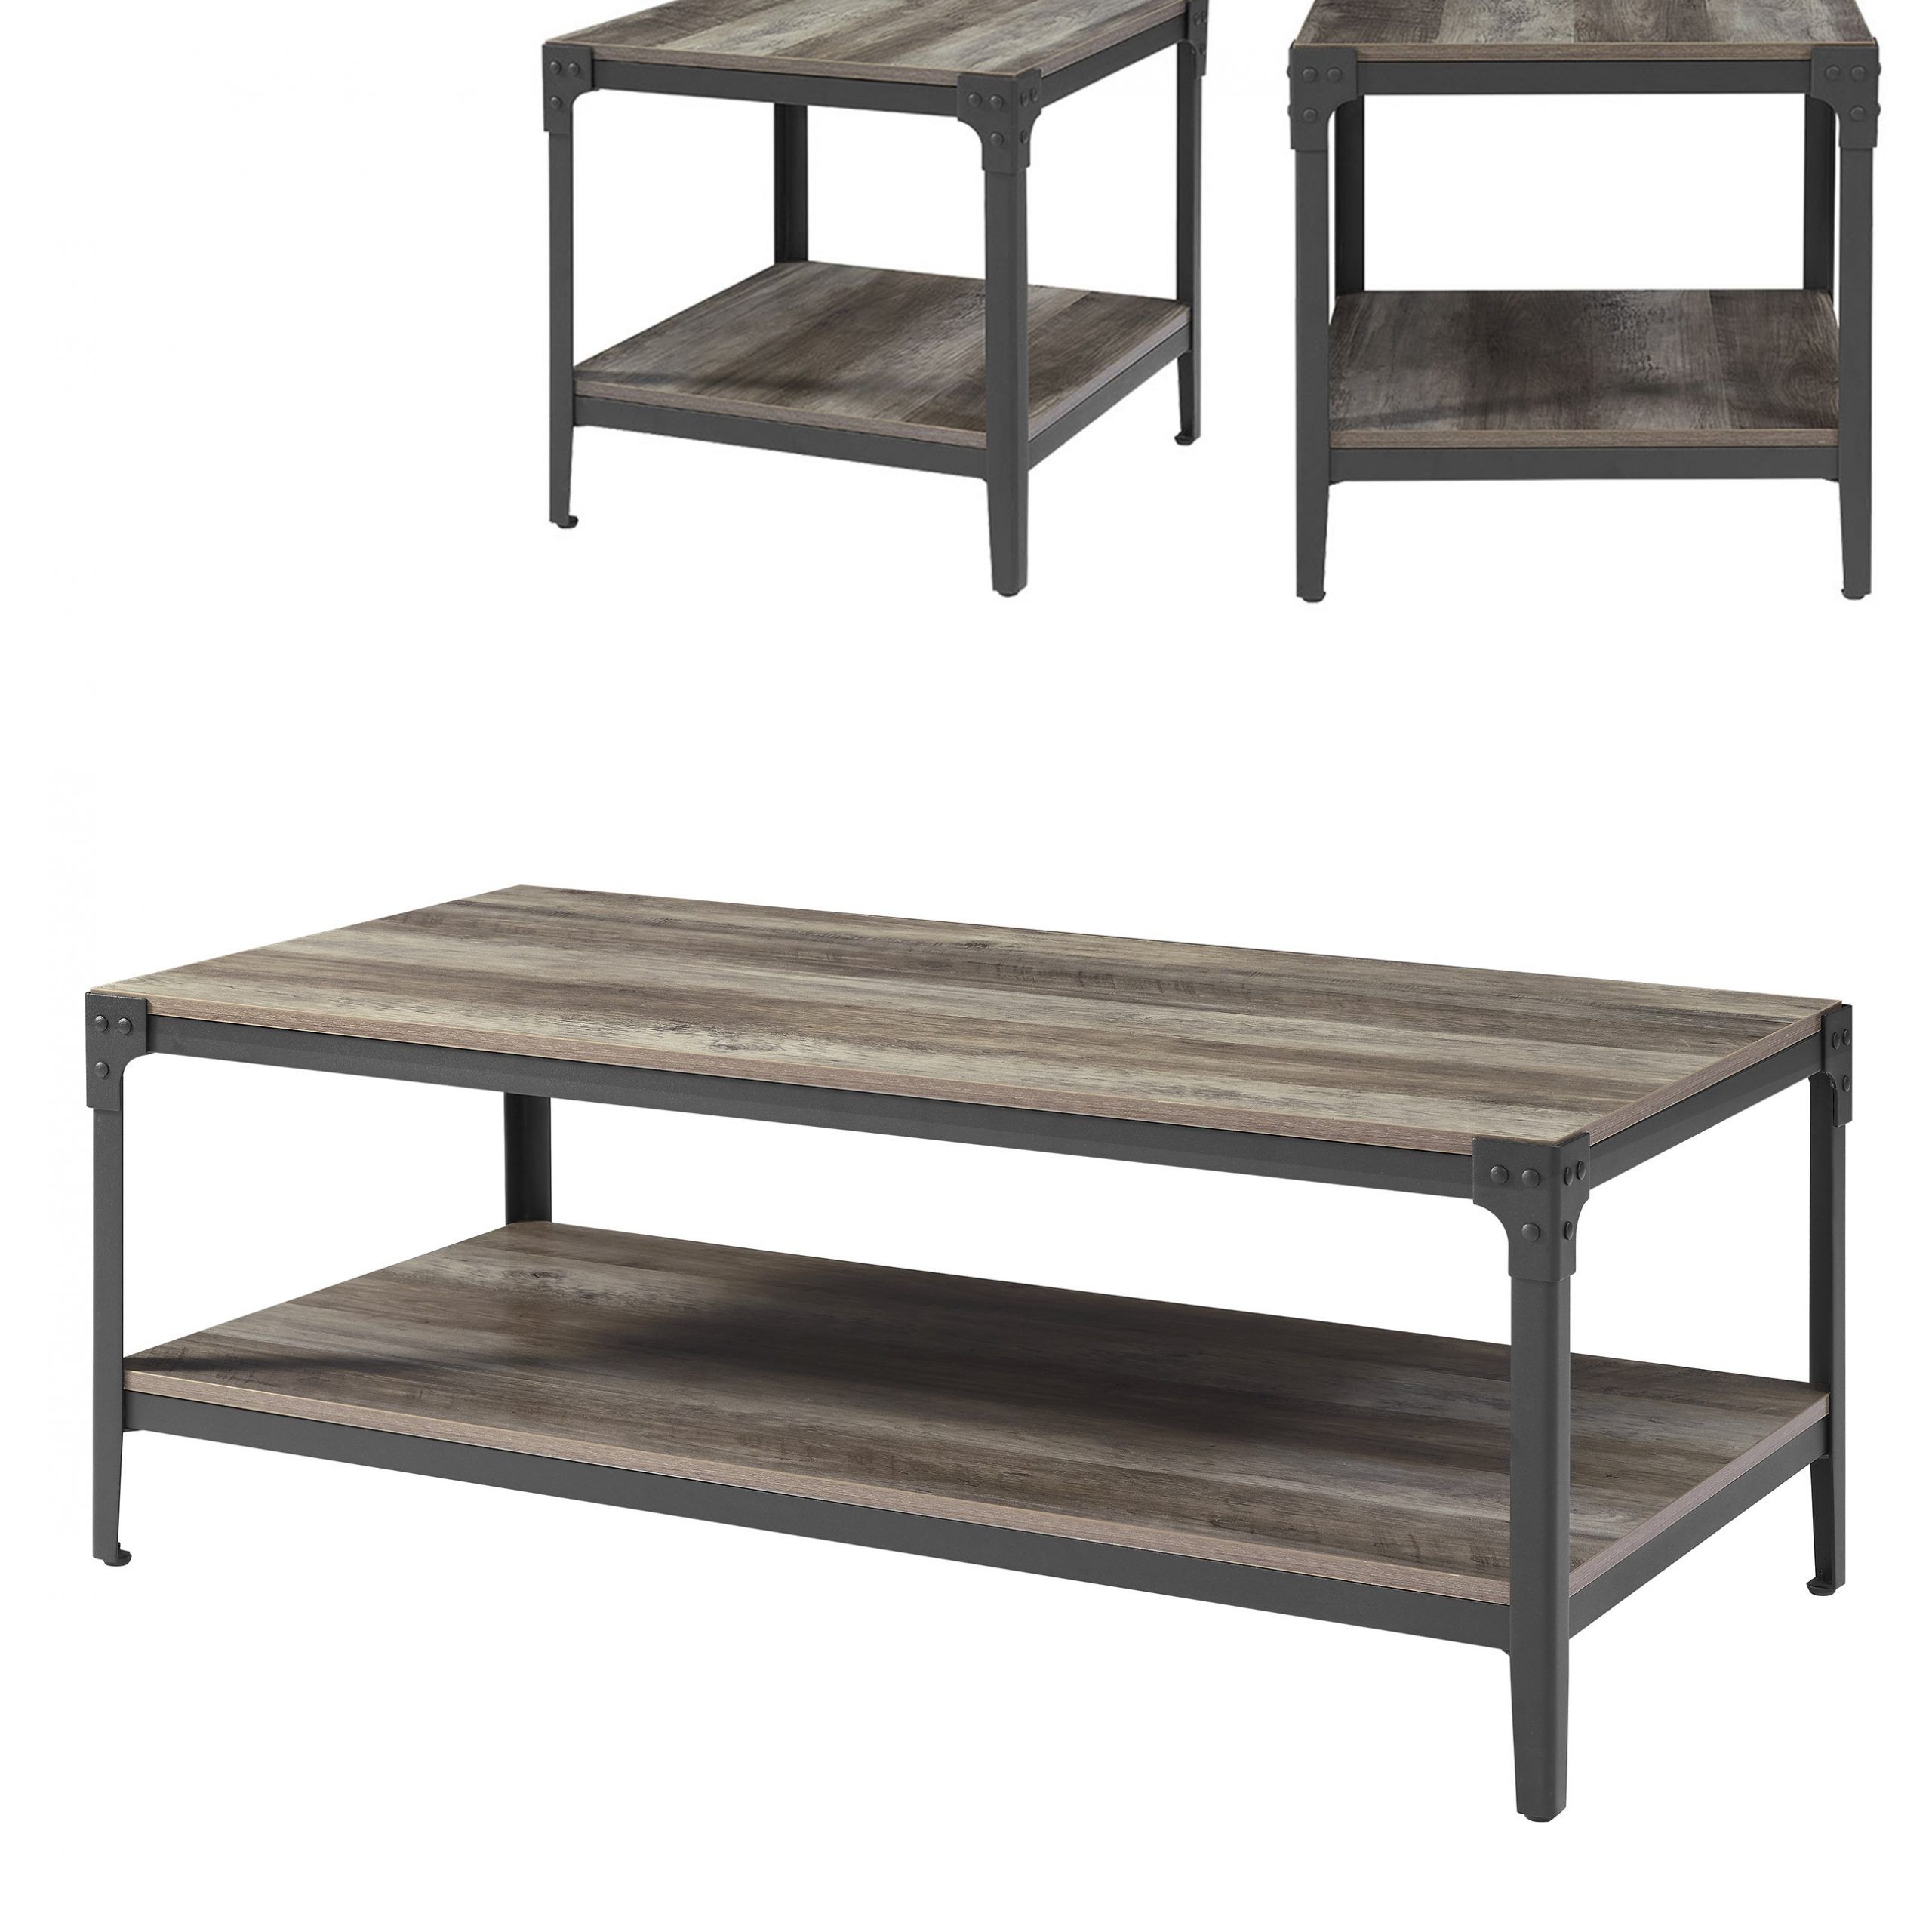 Widely Used Gray Wash Coffee Tables With Regard To Manor Park 3 Piece Rustic Coffee Table Set – Grey Wash – Walmart (View 7 of 10)